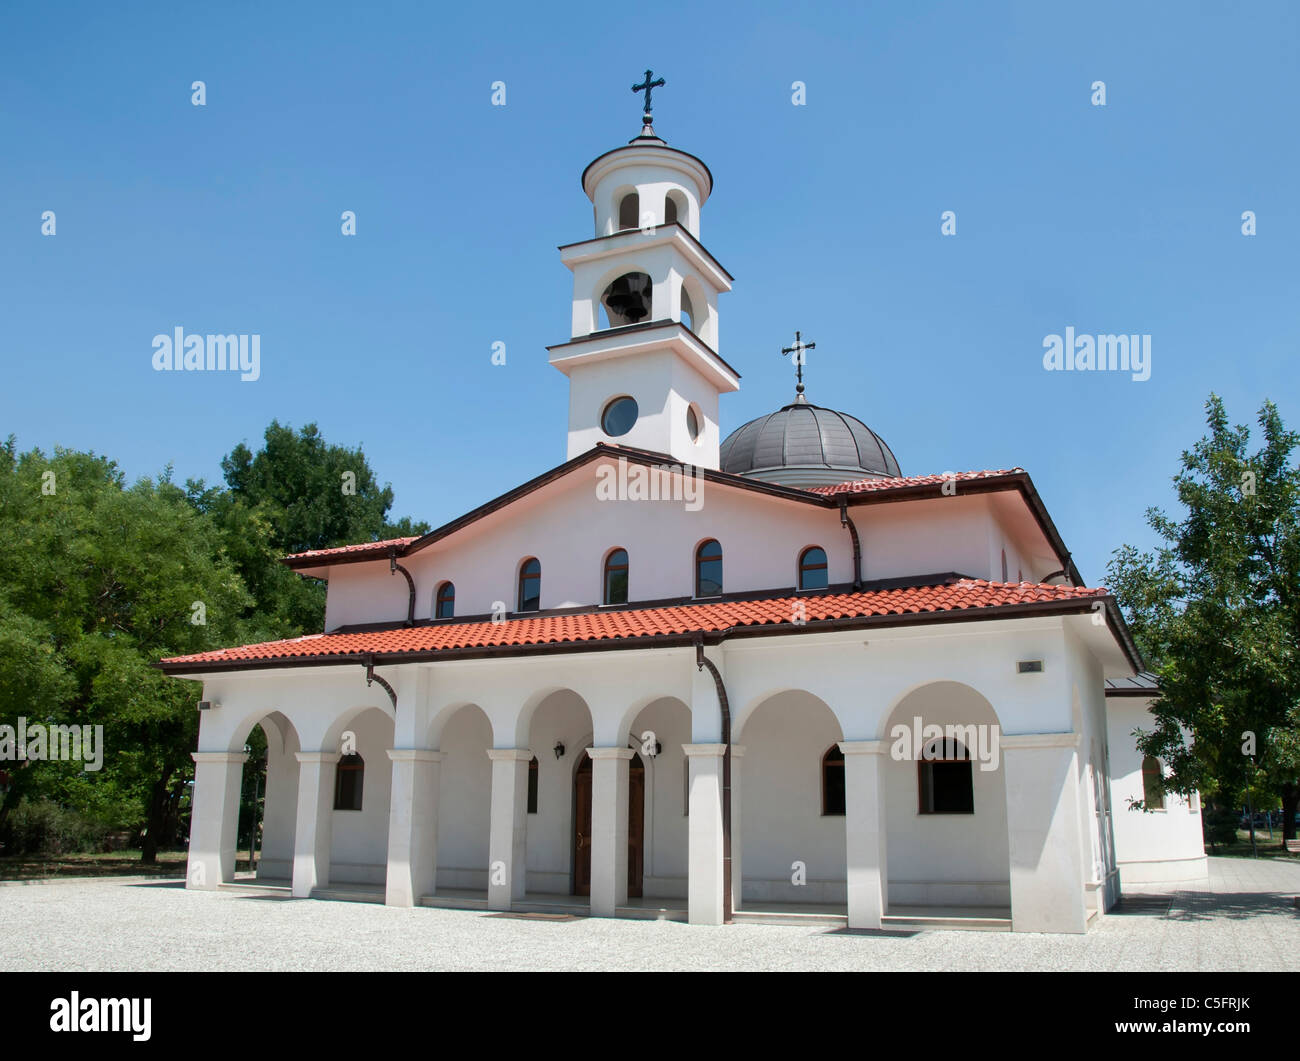 White Orthodox Church with two domes Stock Photo